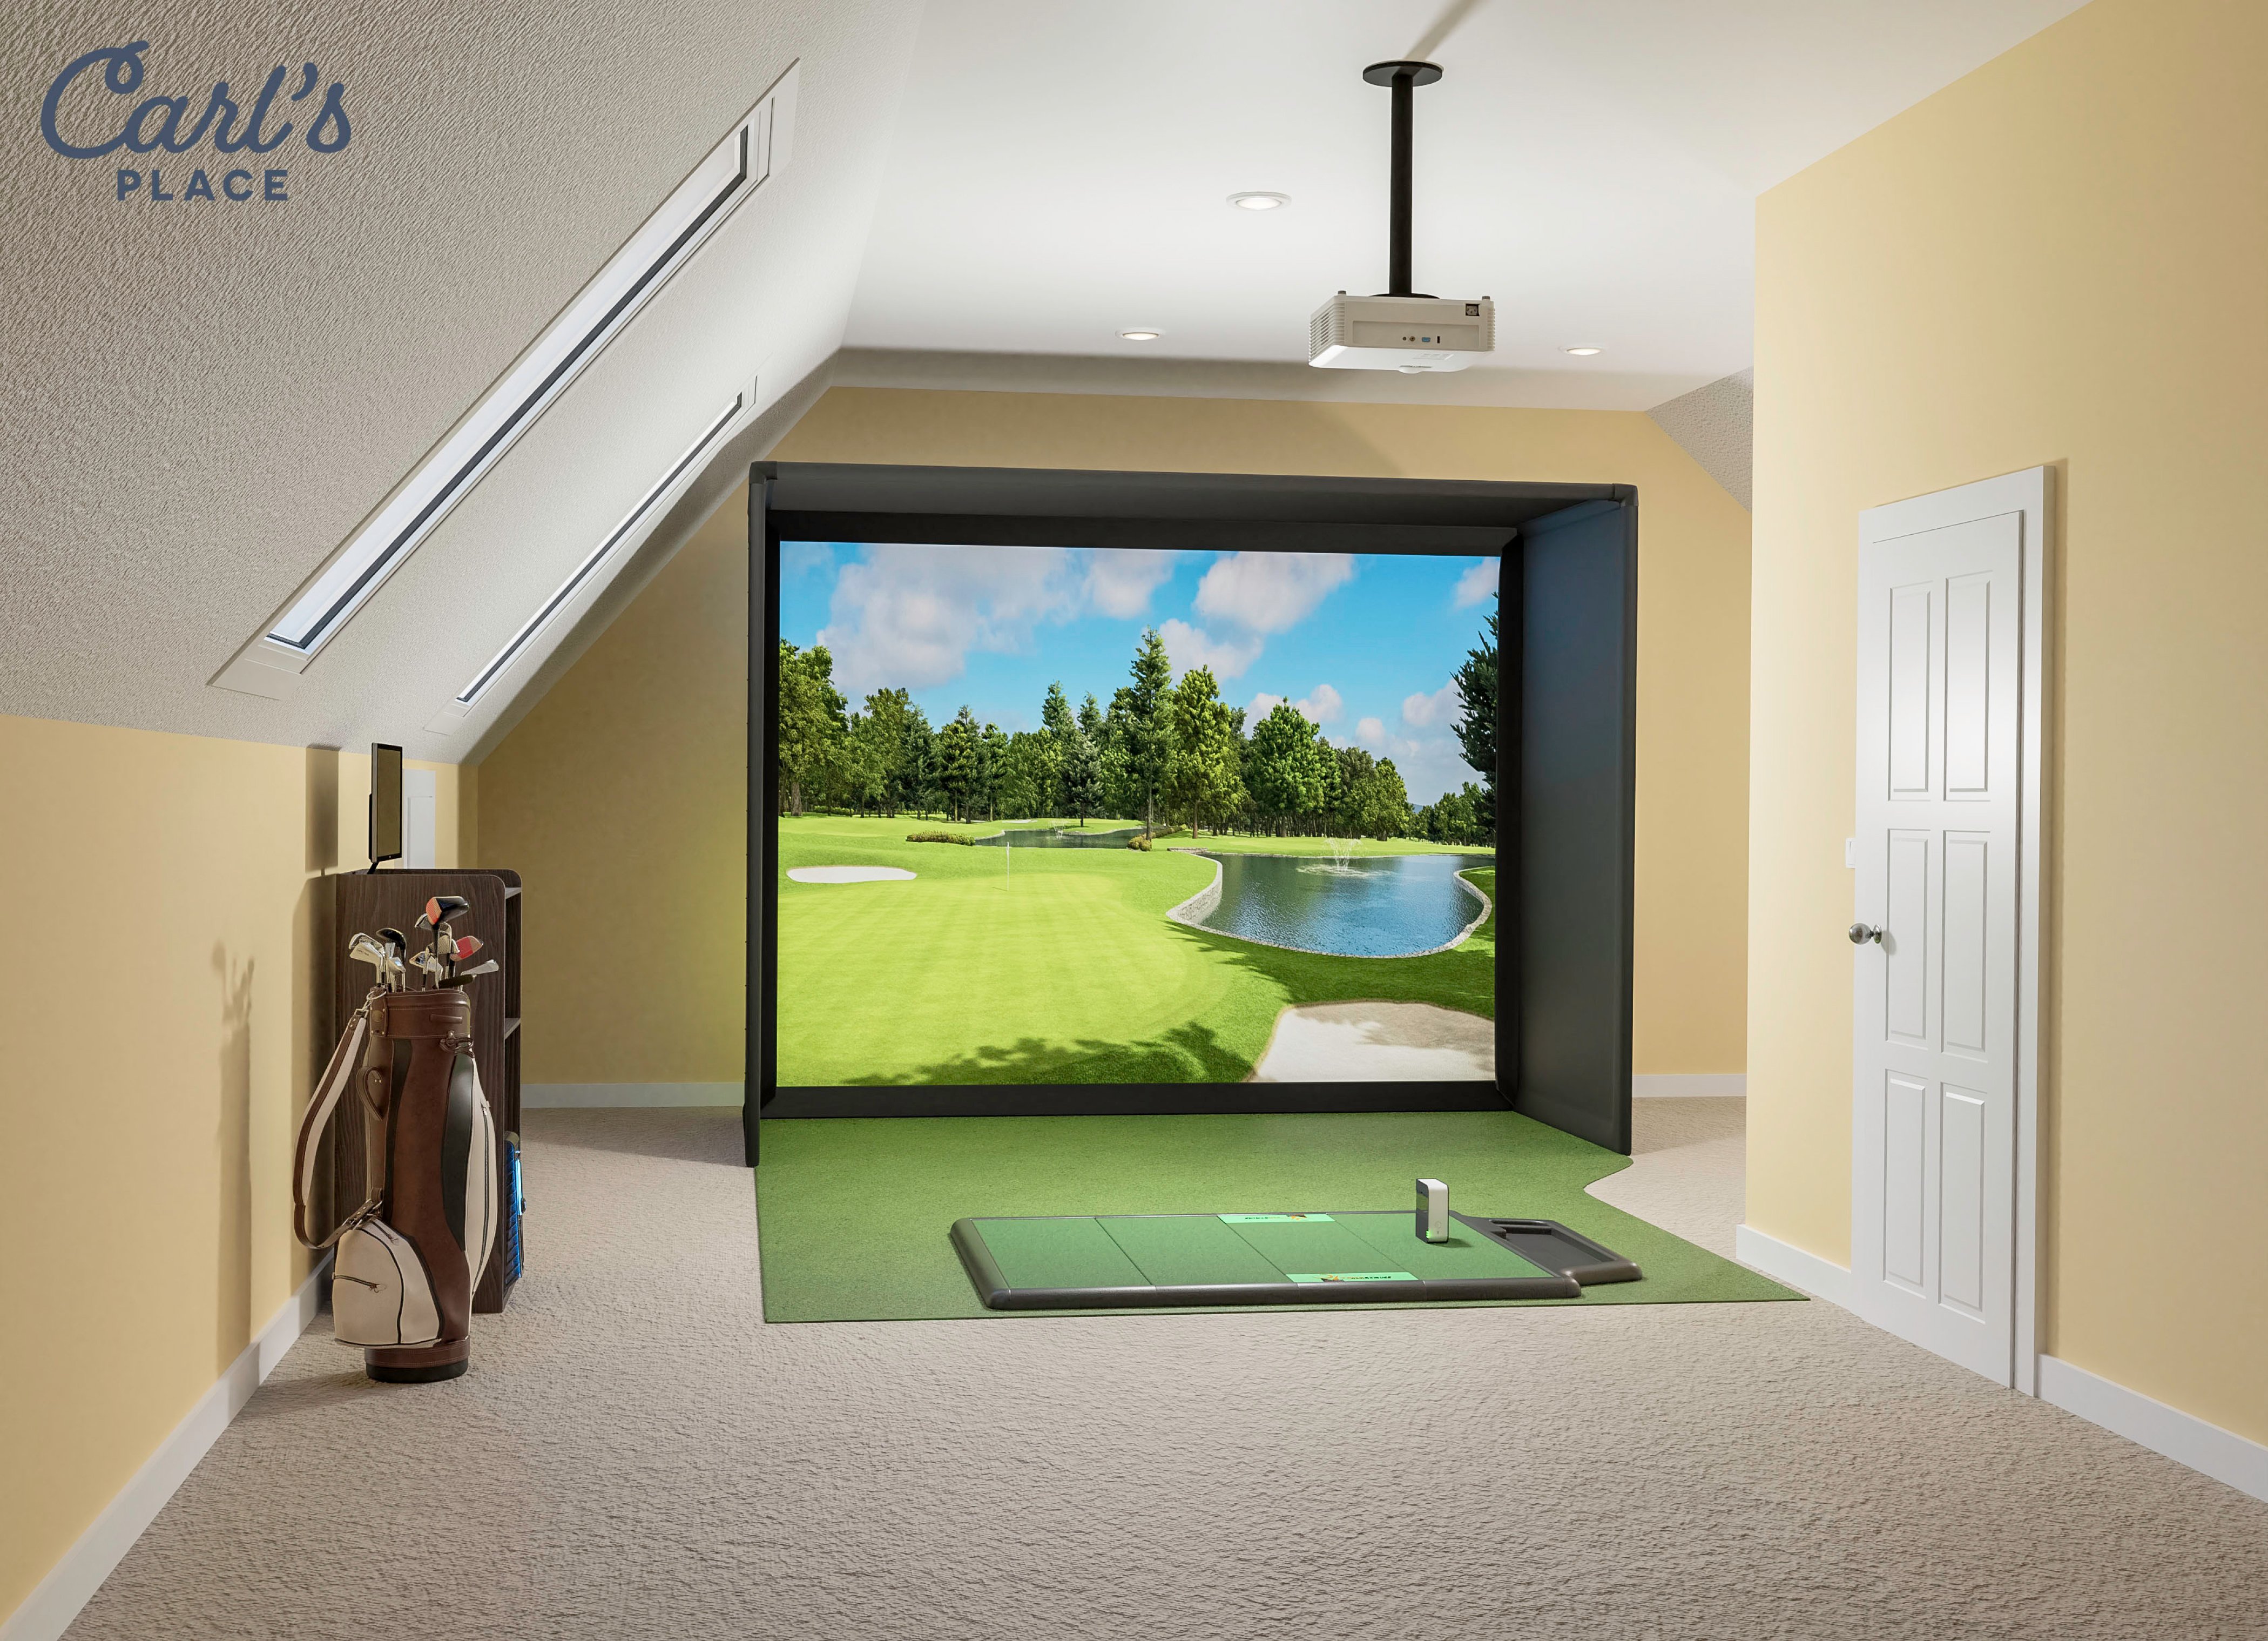 What is a golf simulator? Carl's Place